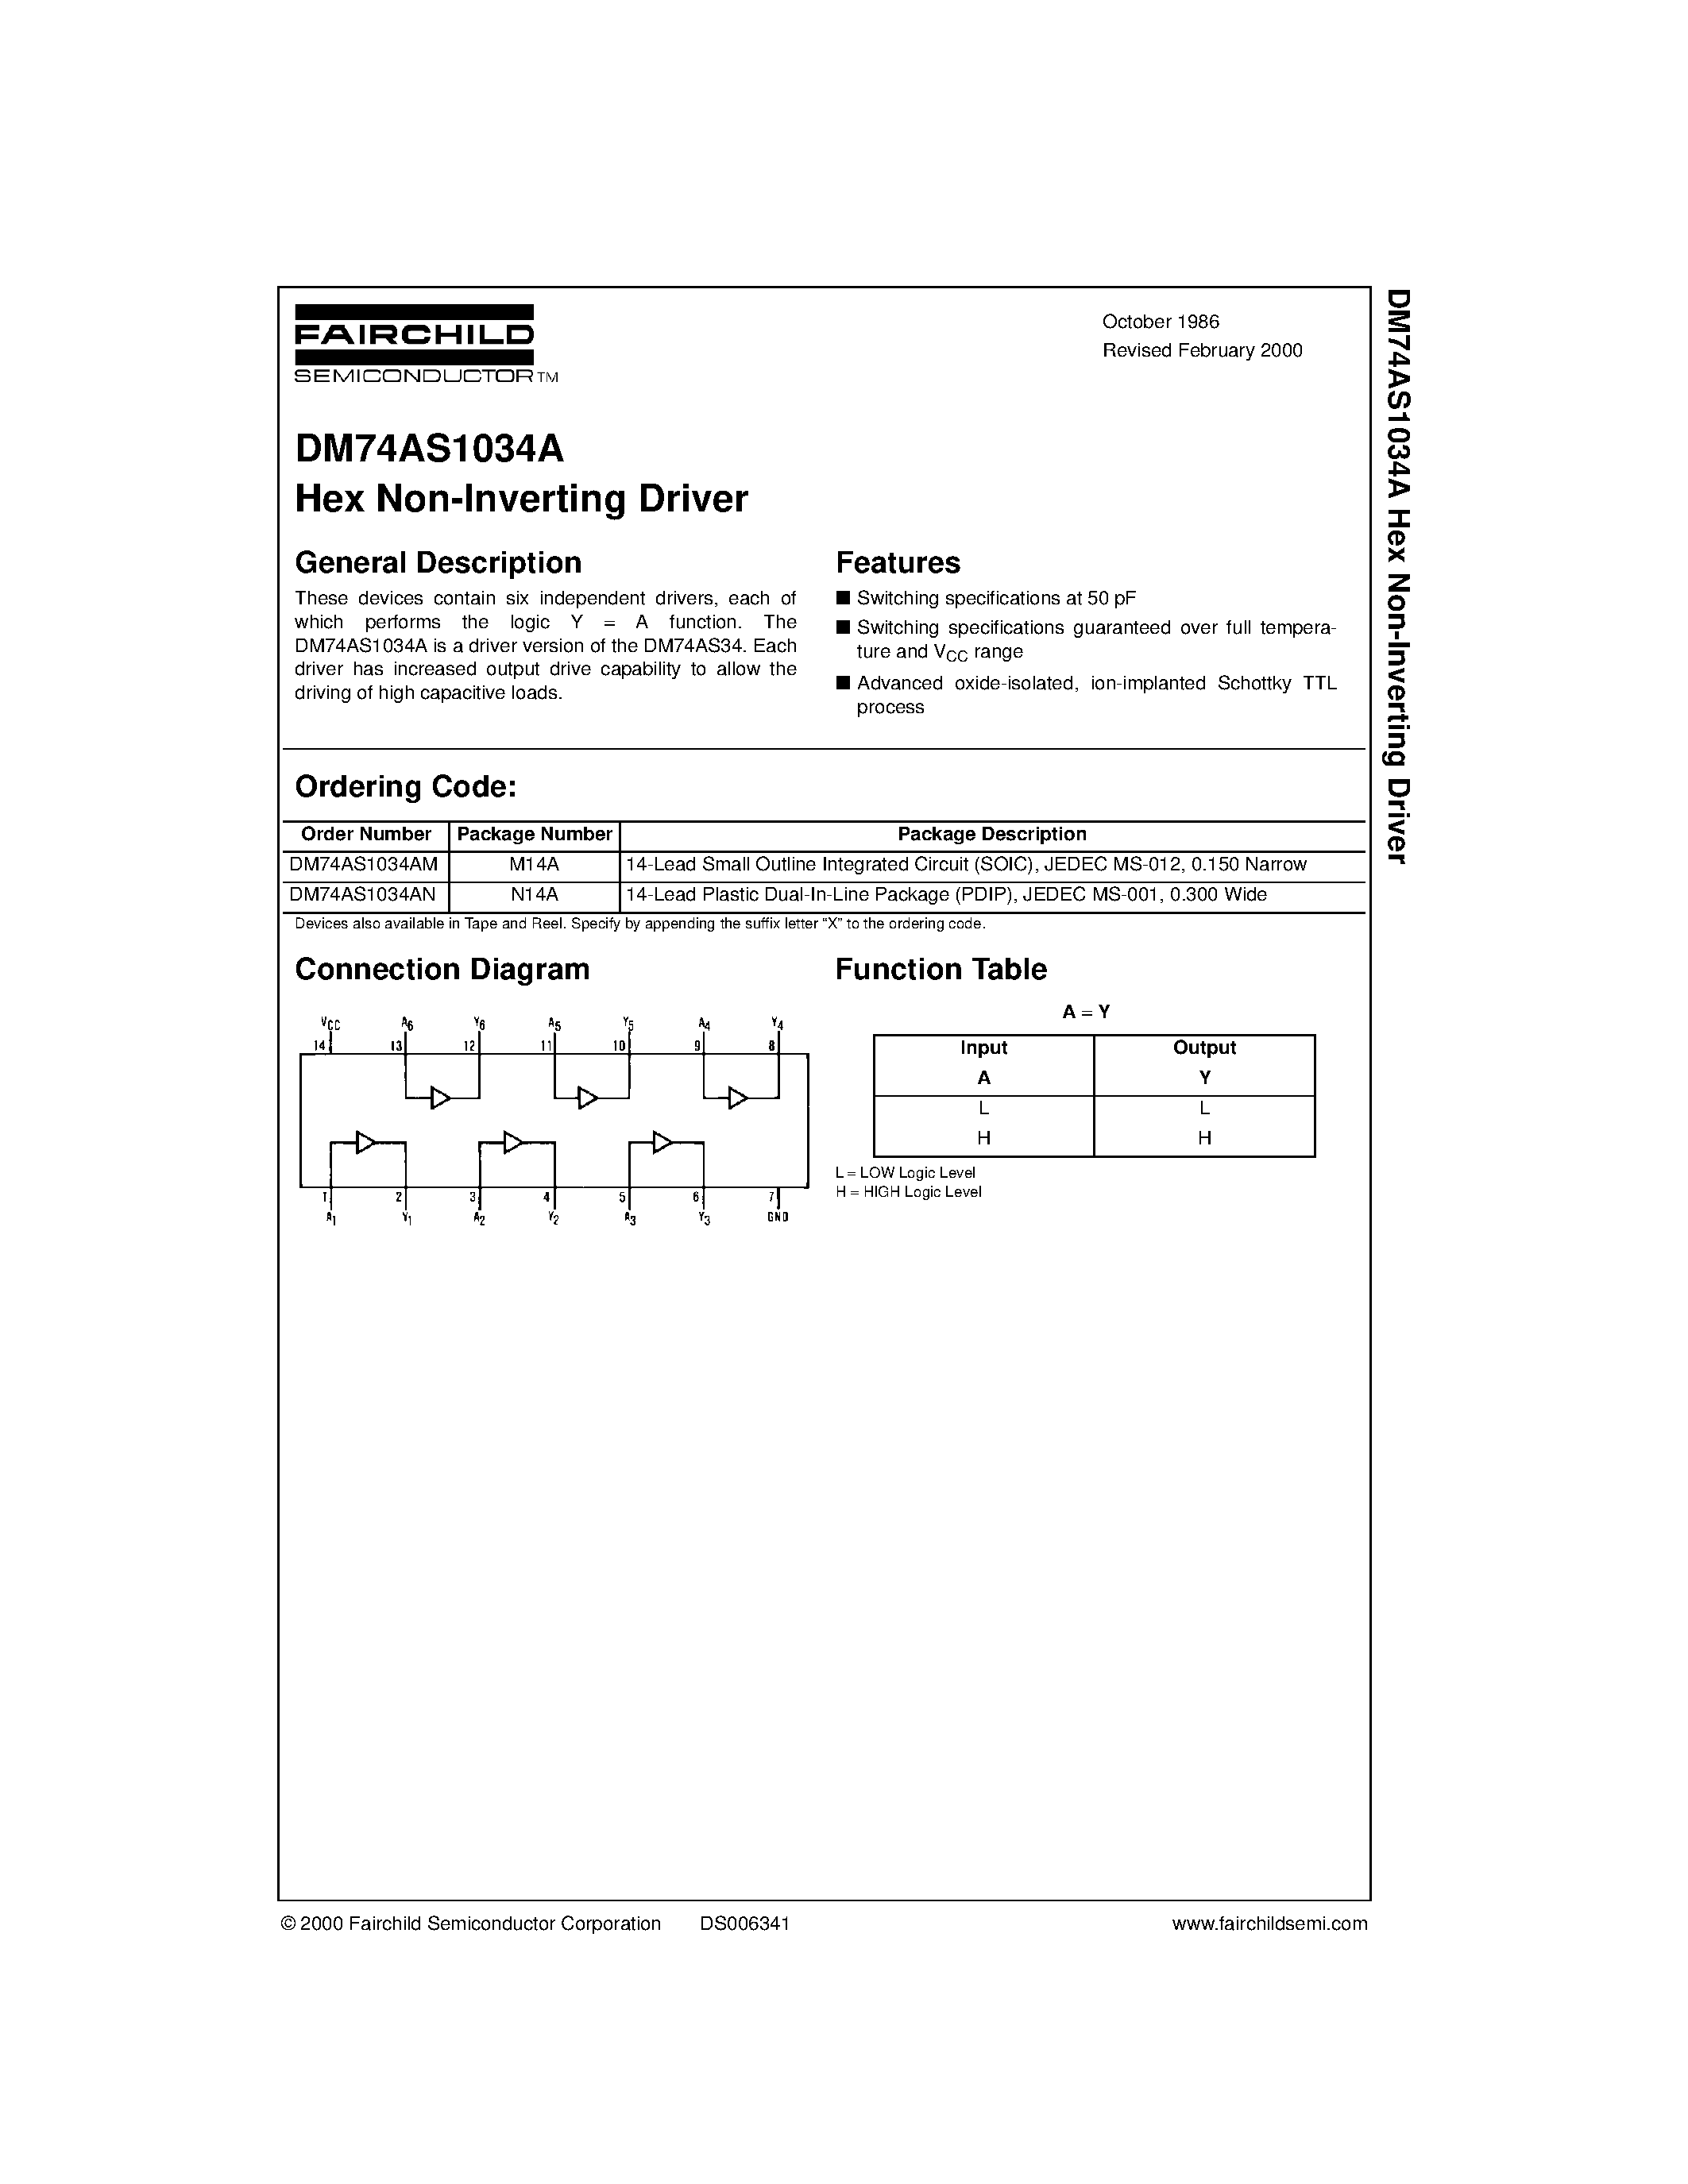 Datasheet DM74AS1034A - Hex Non-Inverting Driver page 1